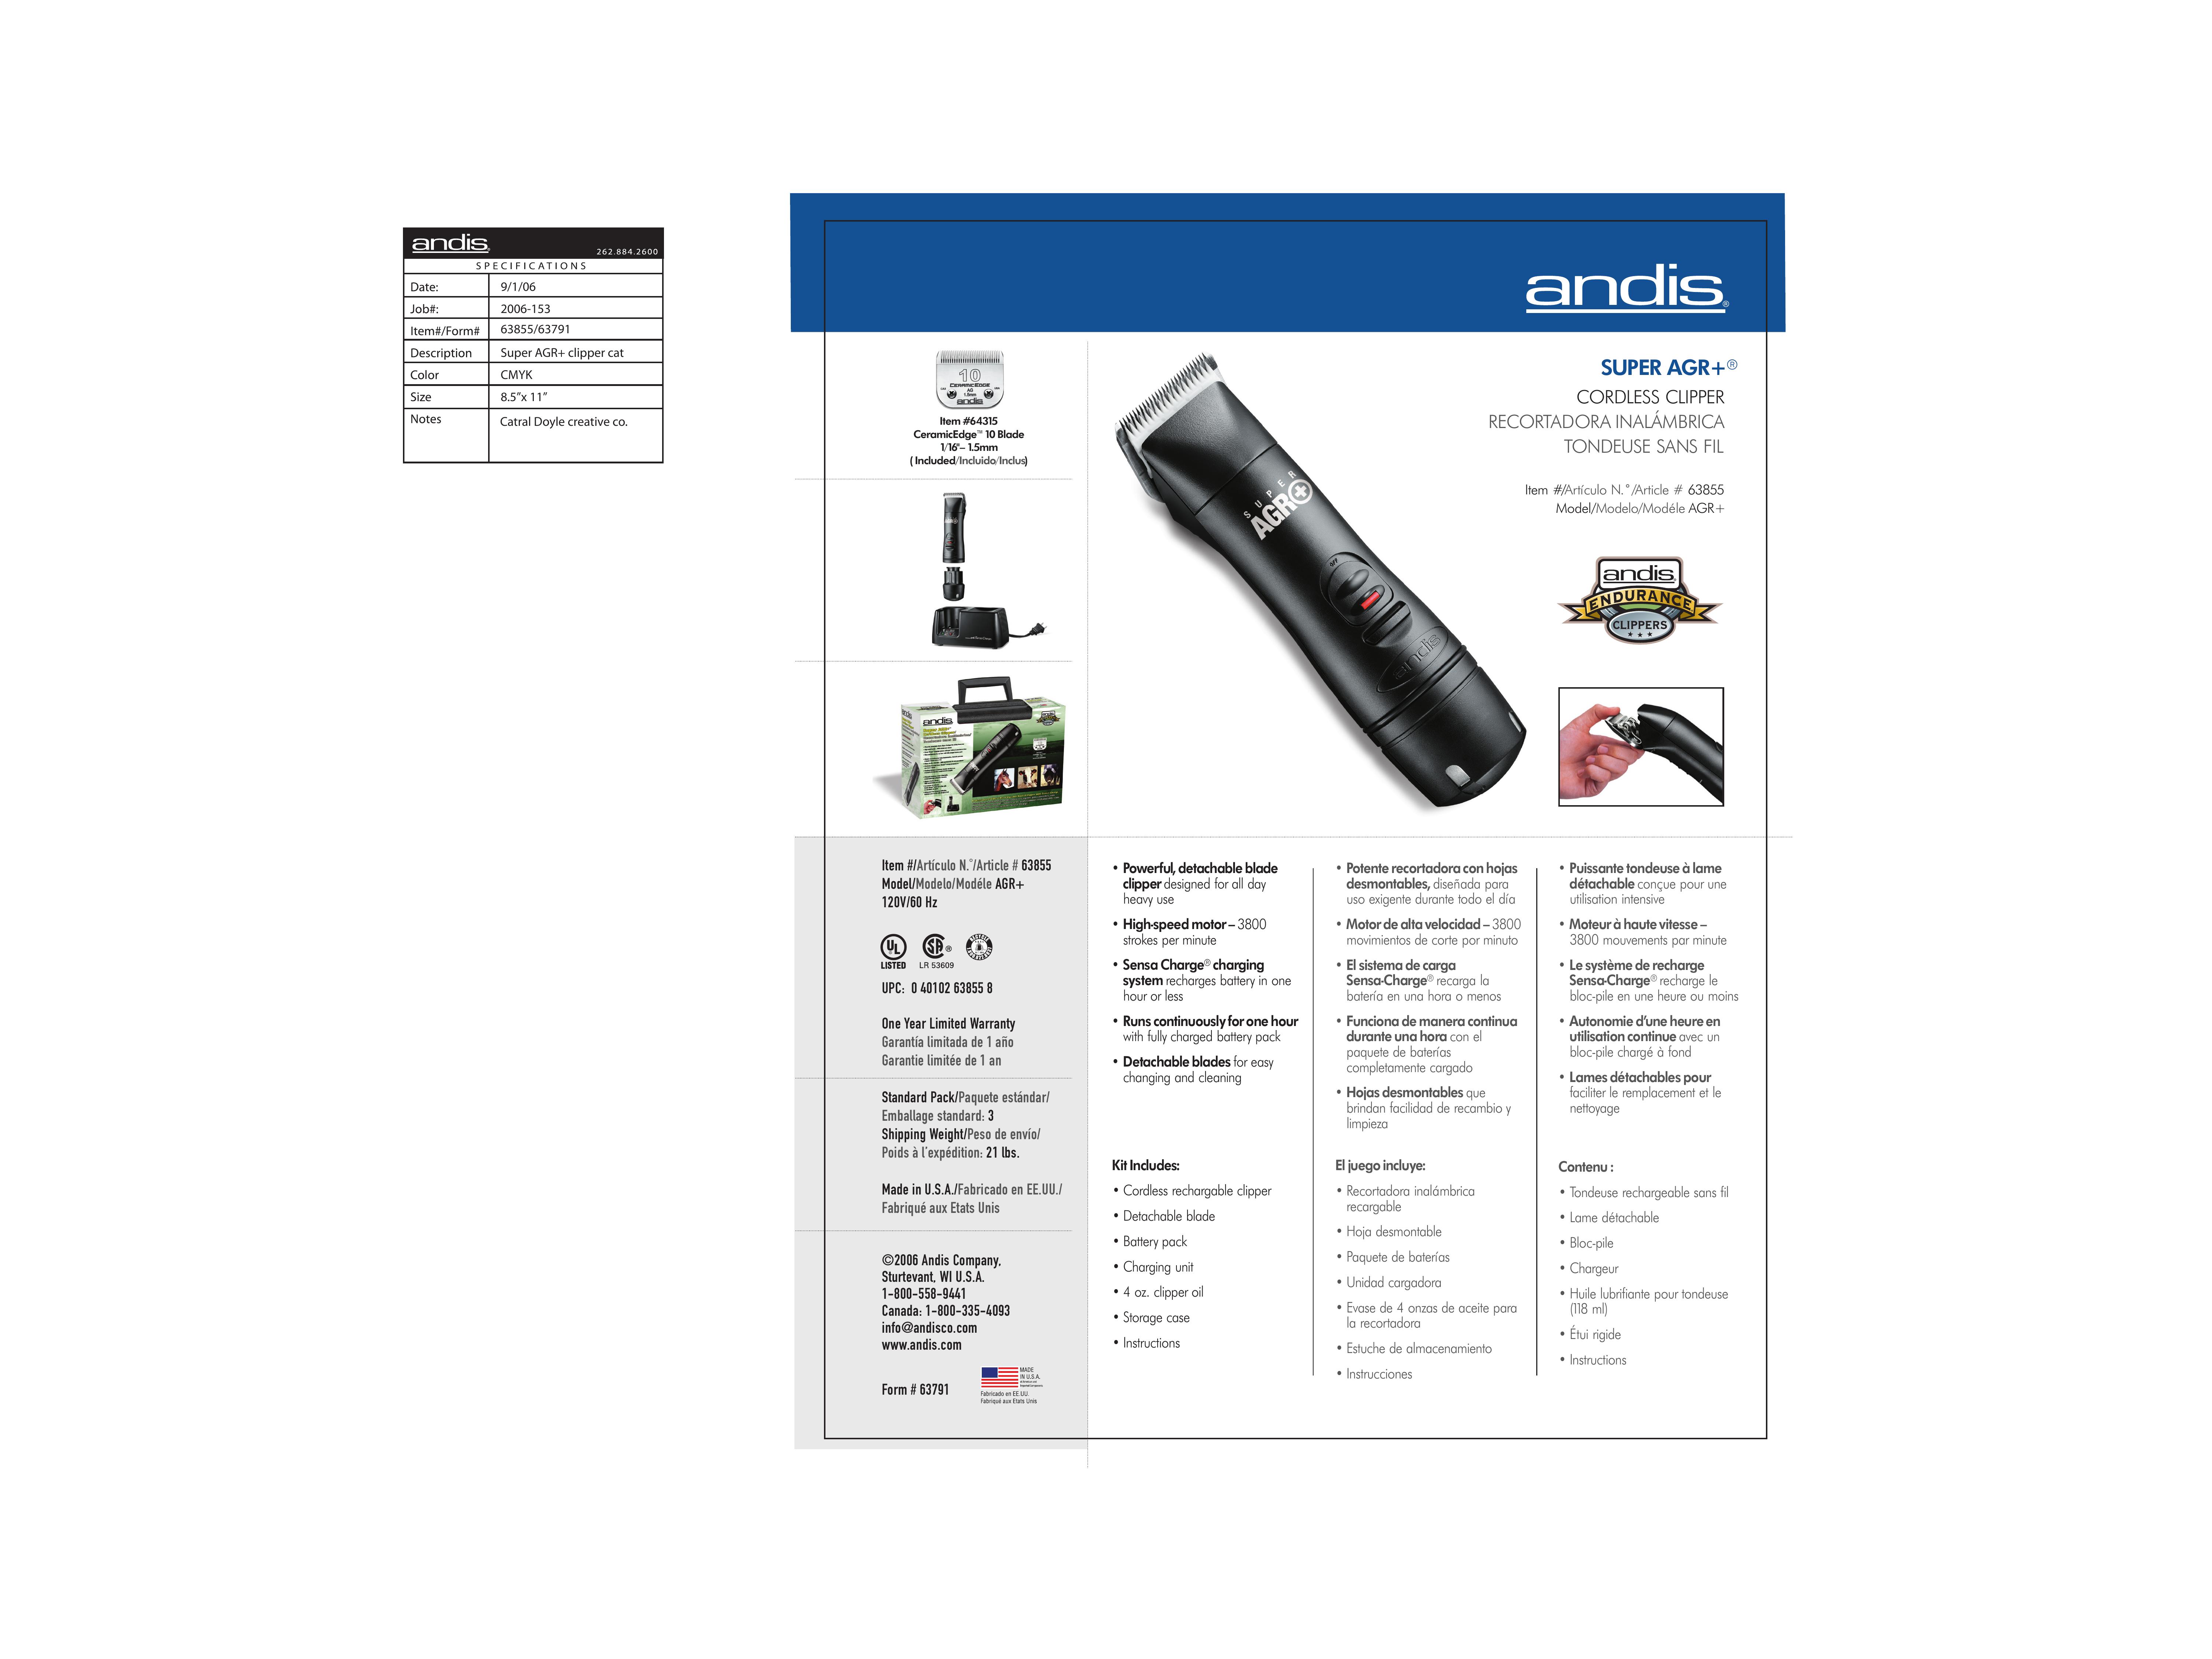 Andis Company AGR+ Hair Clippers User Manual